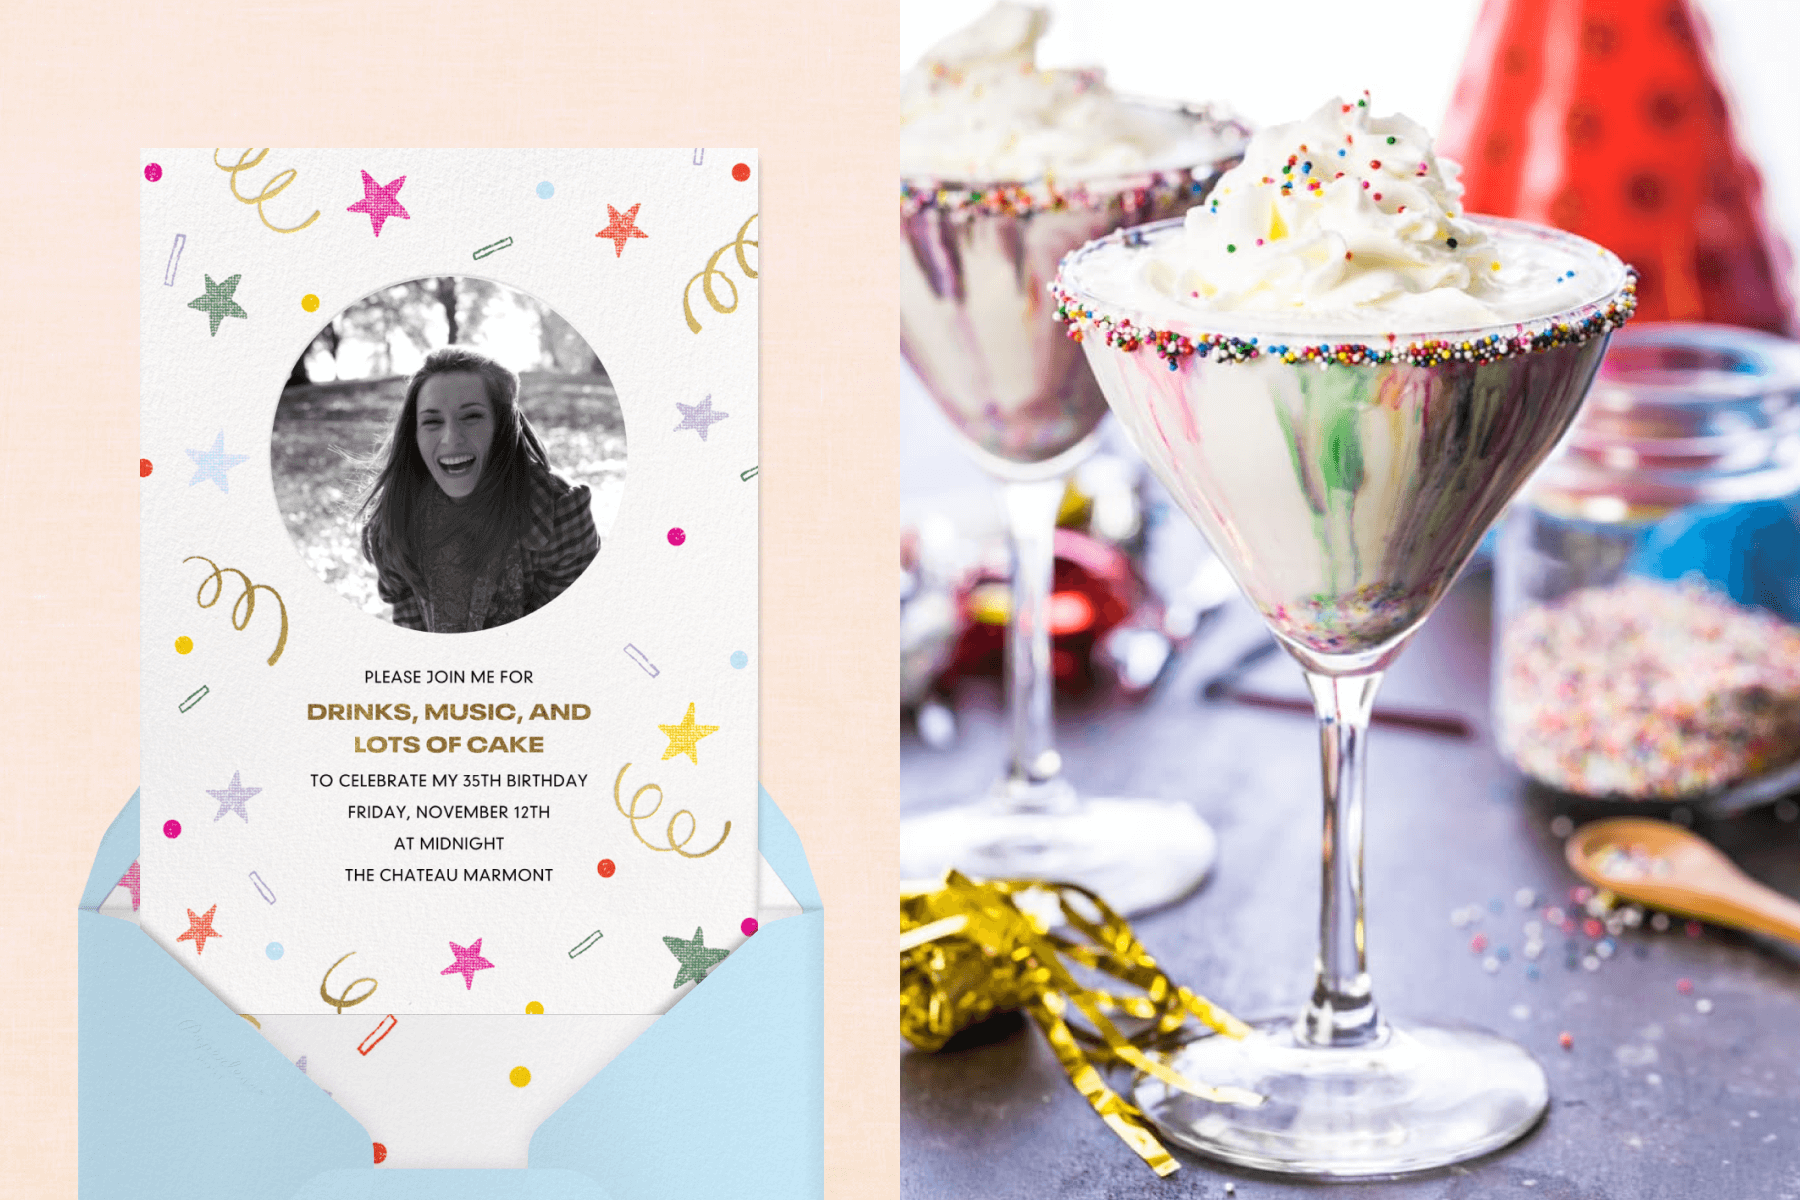 left: A birthday invitation with a black and white photo of a woman in a circle, surrounded by colorful doodles of stars and squiggles. Right: A birthday cake martini in a stemmed glass with sprinkles on the rim and whipped cream on top.